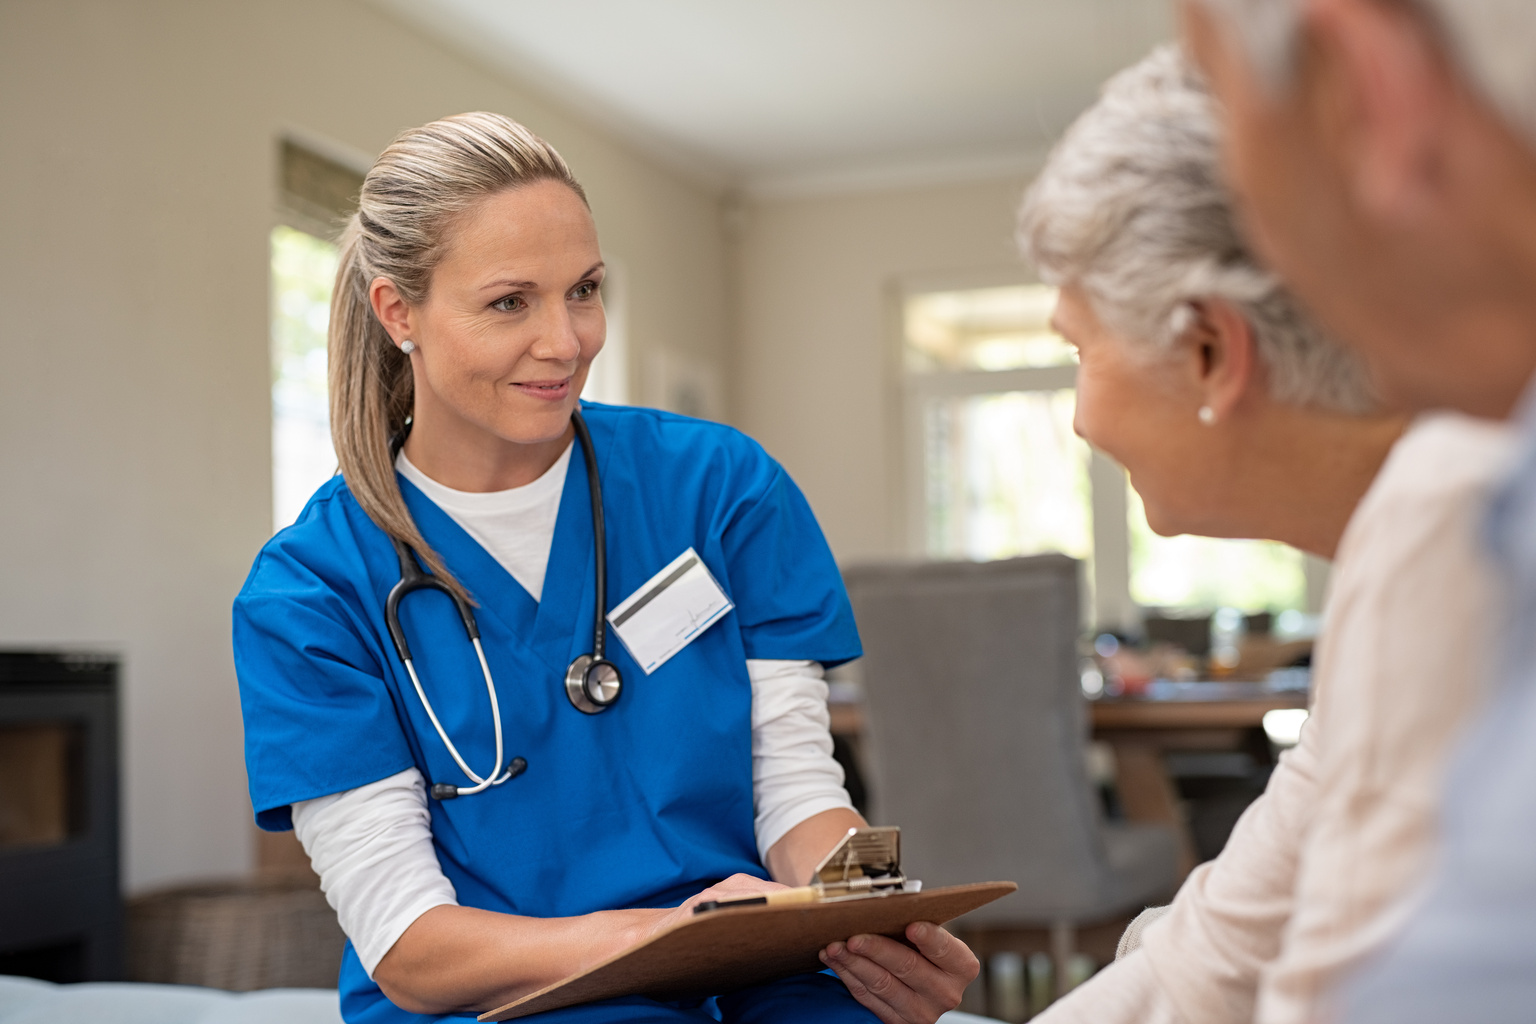 Do nurse manager caring behaviors influence the patient experience?